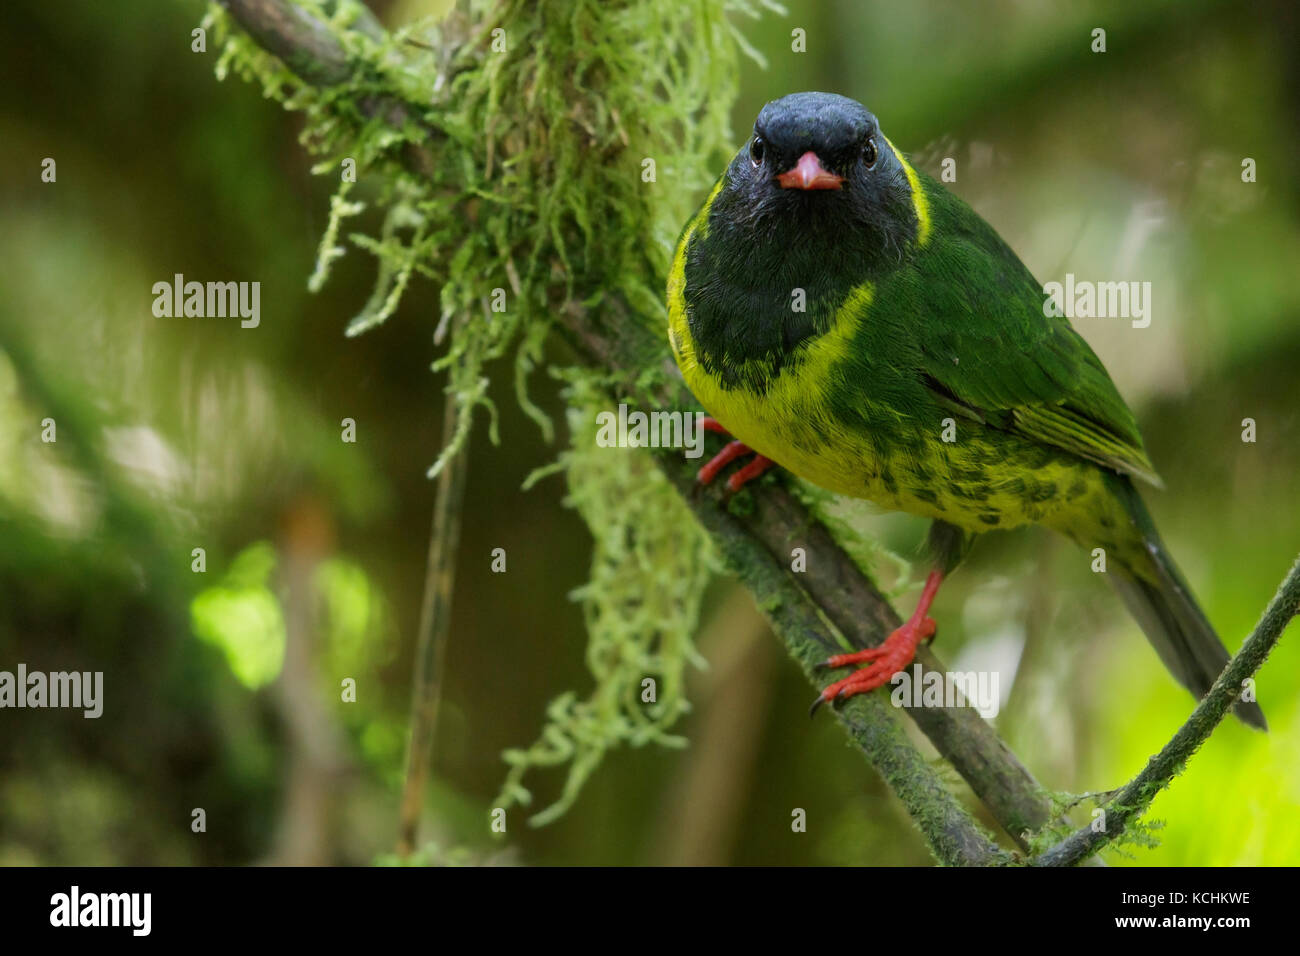 Green and Black Fruiteater (Pipreola riefferii)  perched on a branch in the mountains of Colombia, South America. Stock Photo